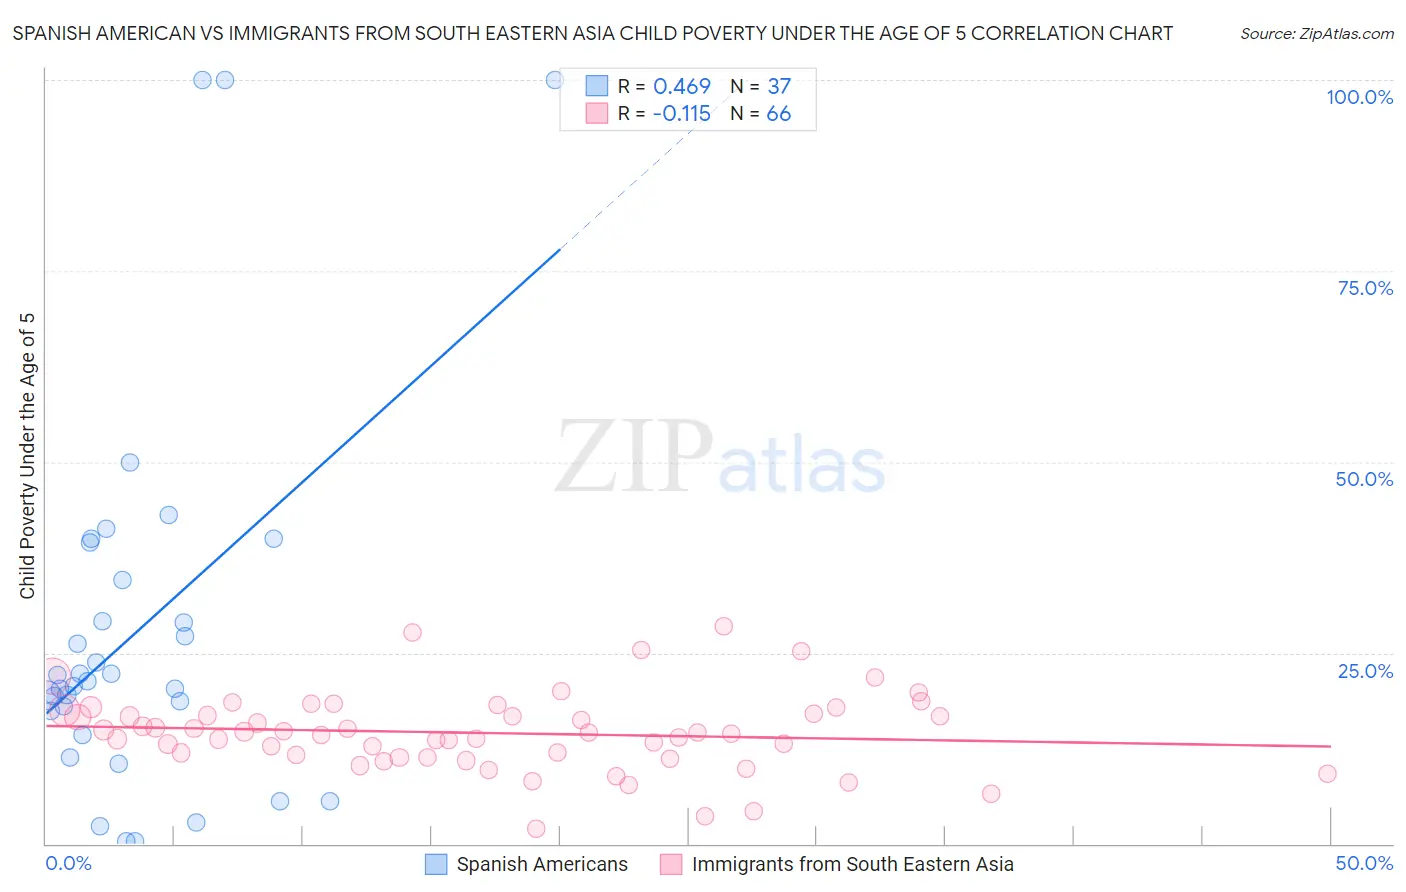 Spanish American vs Immigrants from South Eastern Asia Child Poverty Under the Age of 5